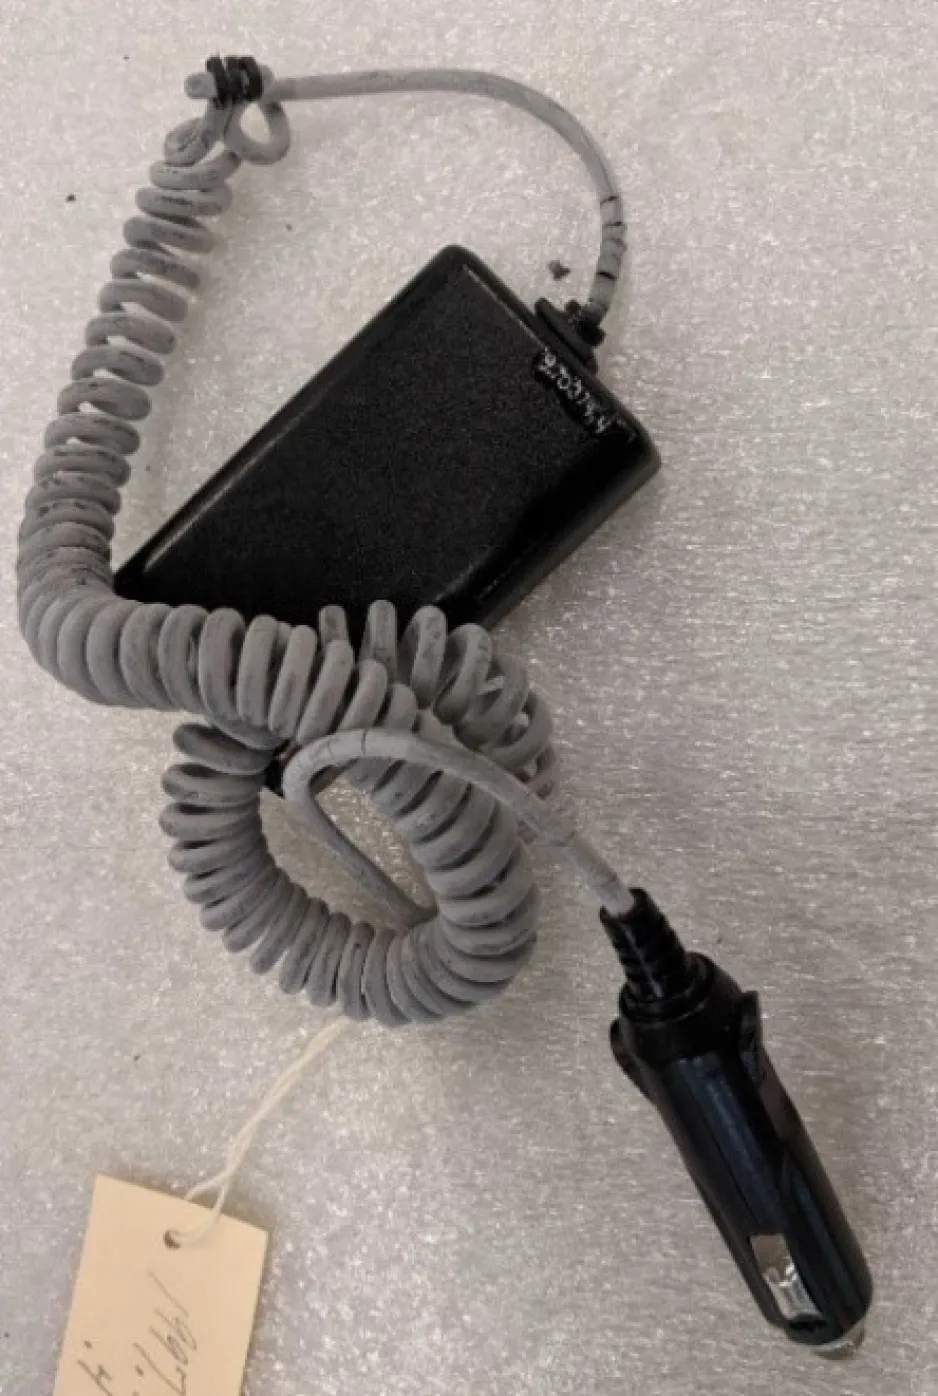 A grey and black cord sites on top of a grey table top.